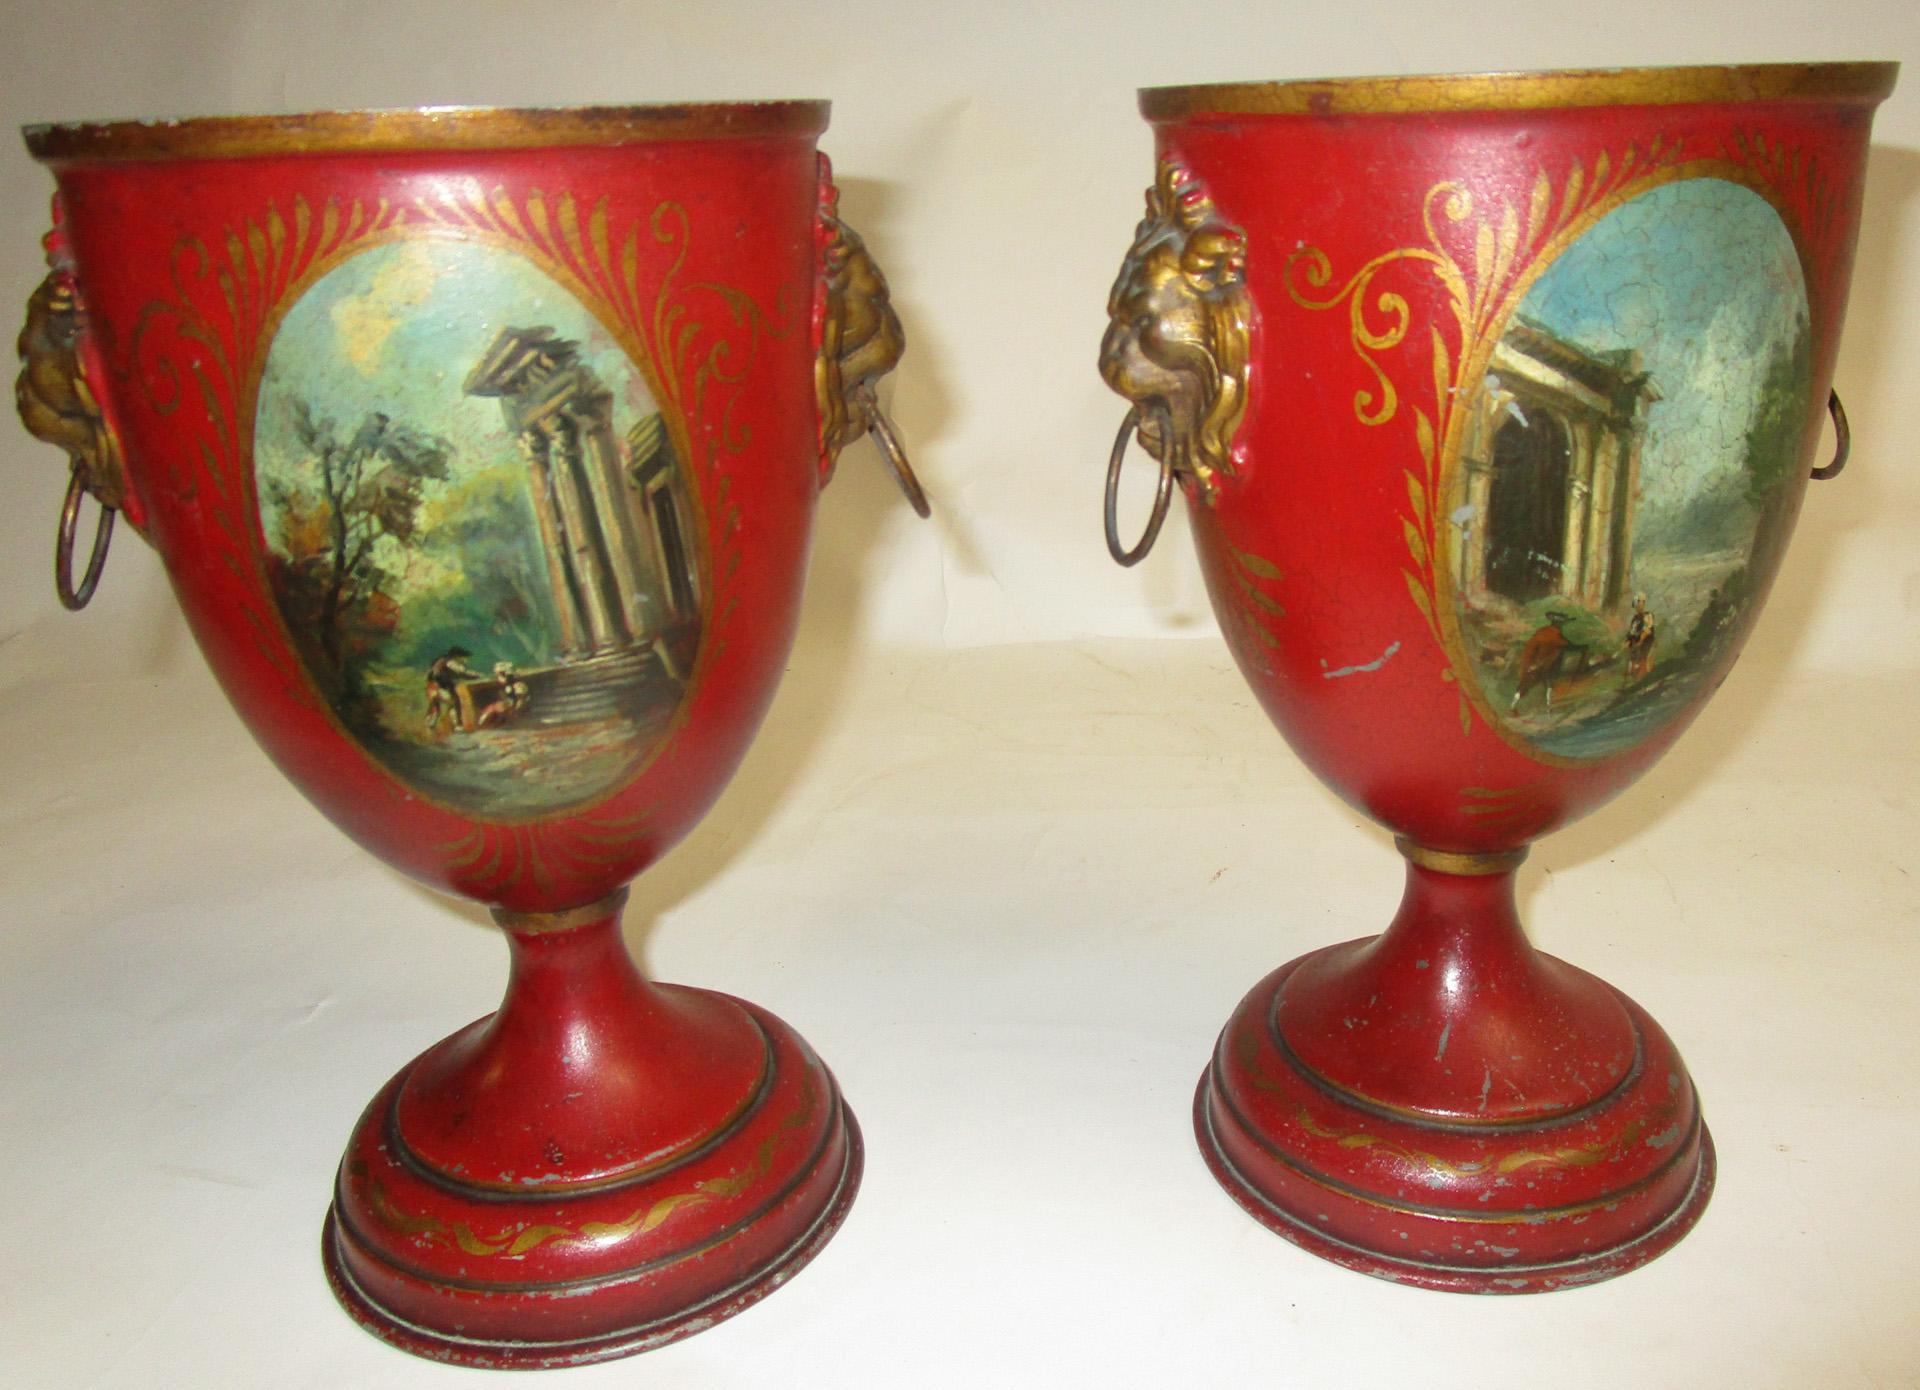 Grand Tour 19th Century French Painted Tole Covered Urn Pair For Sale